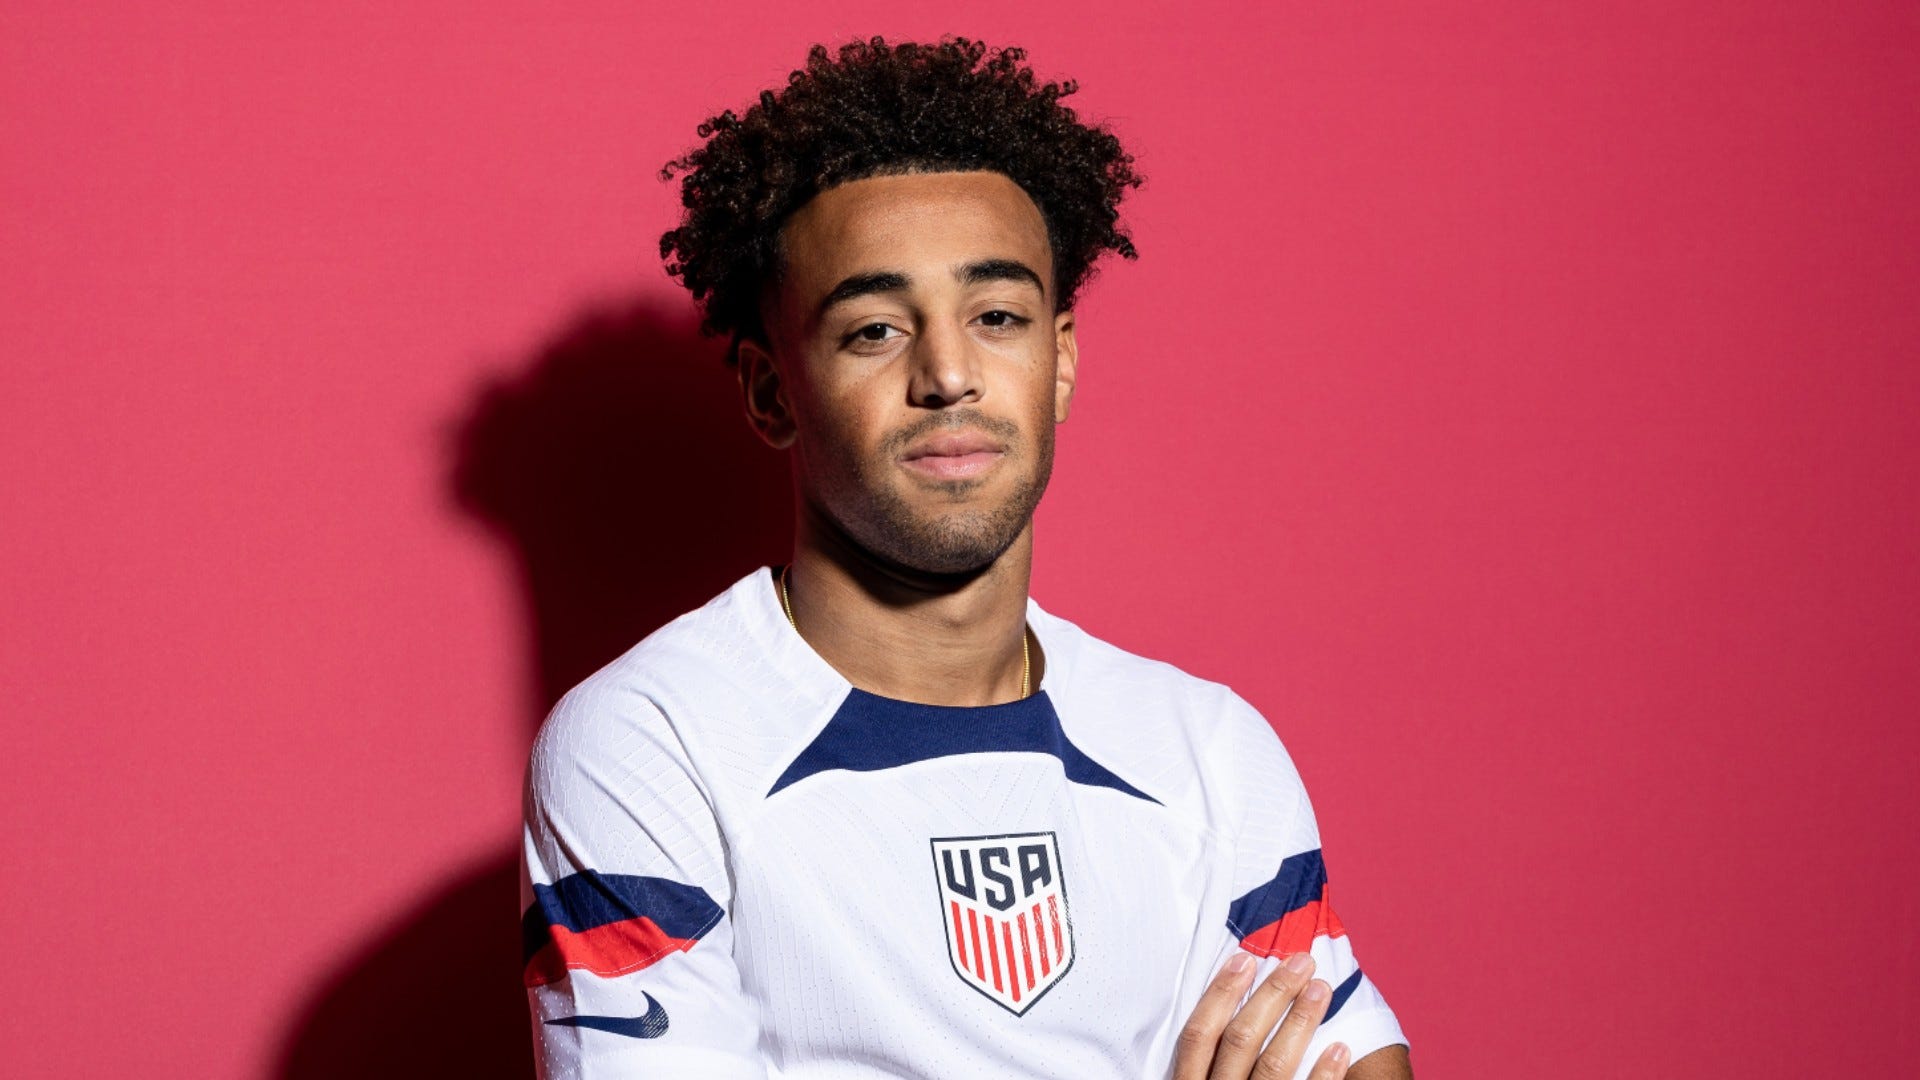 America's Captain! USMNT gets it right by giving Tyler Adams the World Cup armband thumbnail